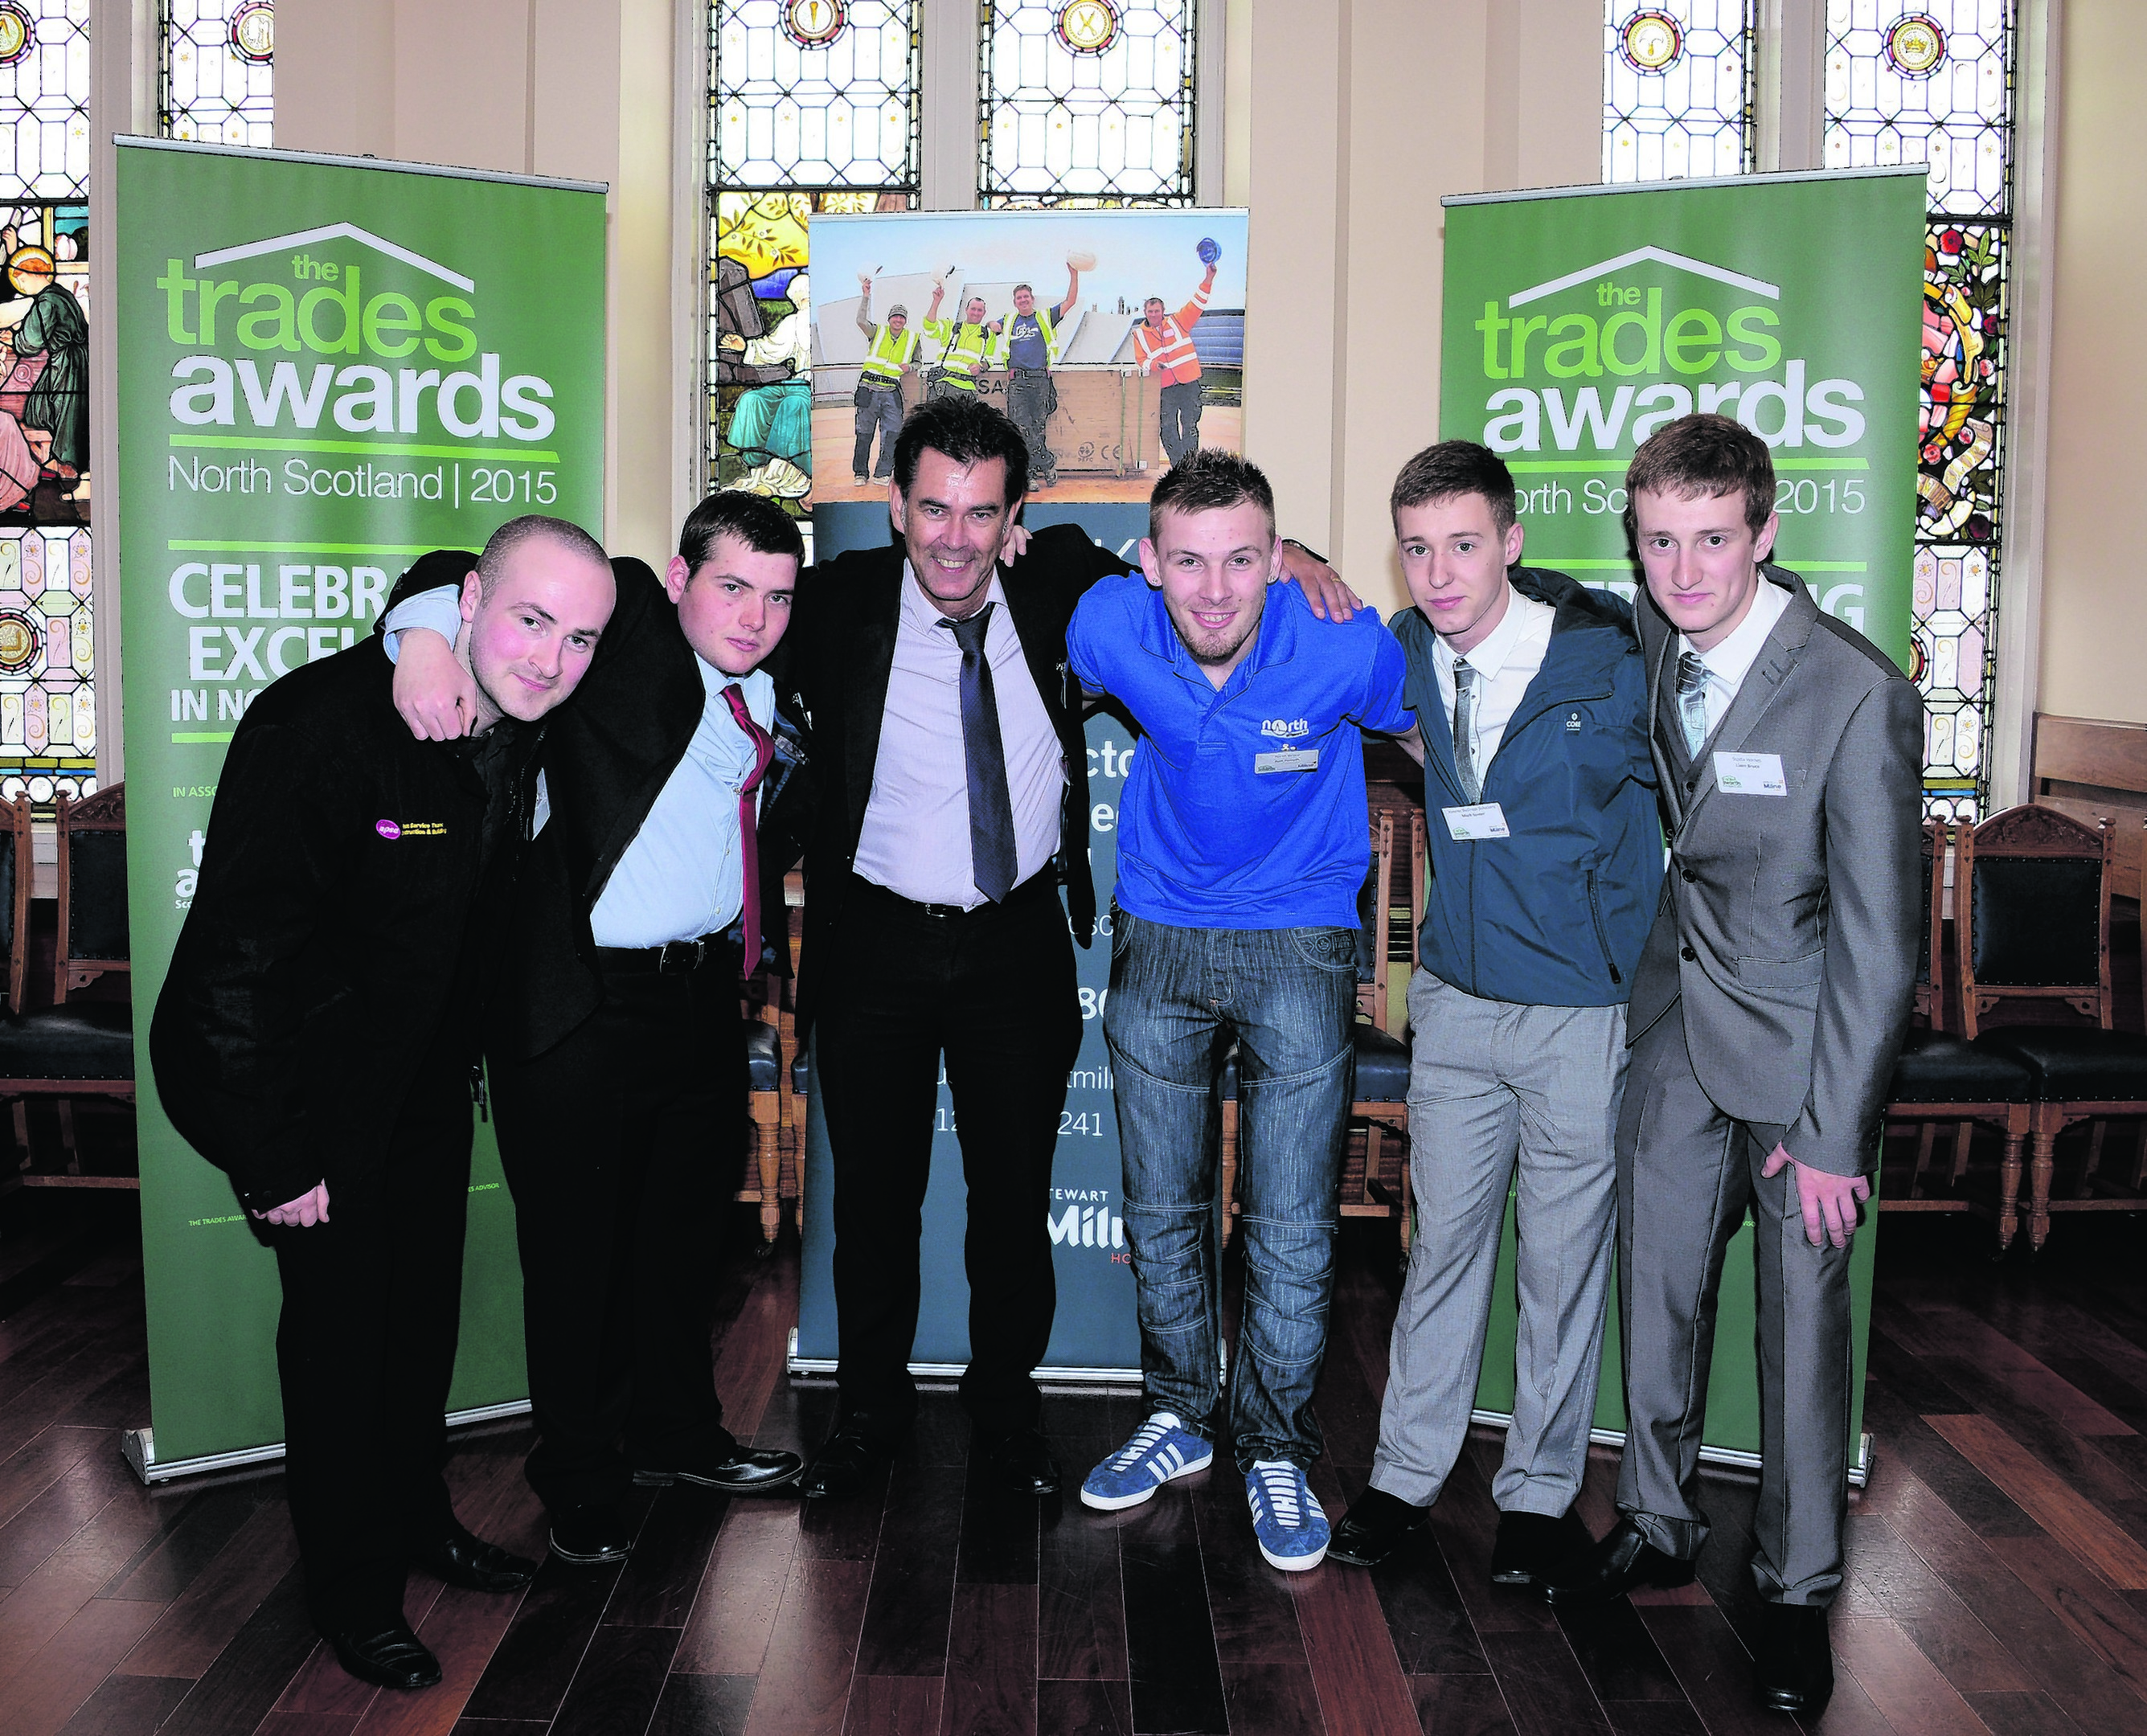 The Trades Awards 'Apprentice of the Year' finalists appear with one of the judges, Neil Thomson, construction director at Stewart Milne Group (Awards Main Sponsor).